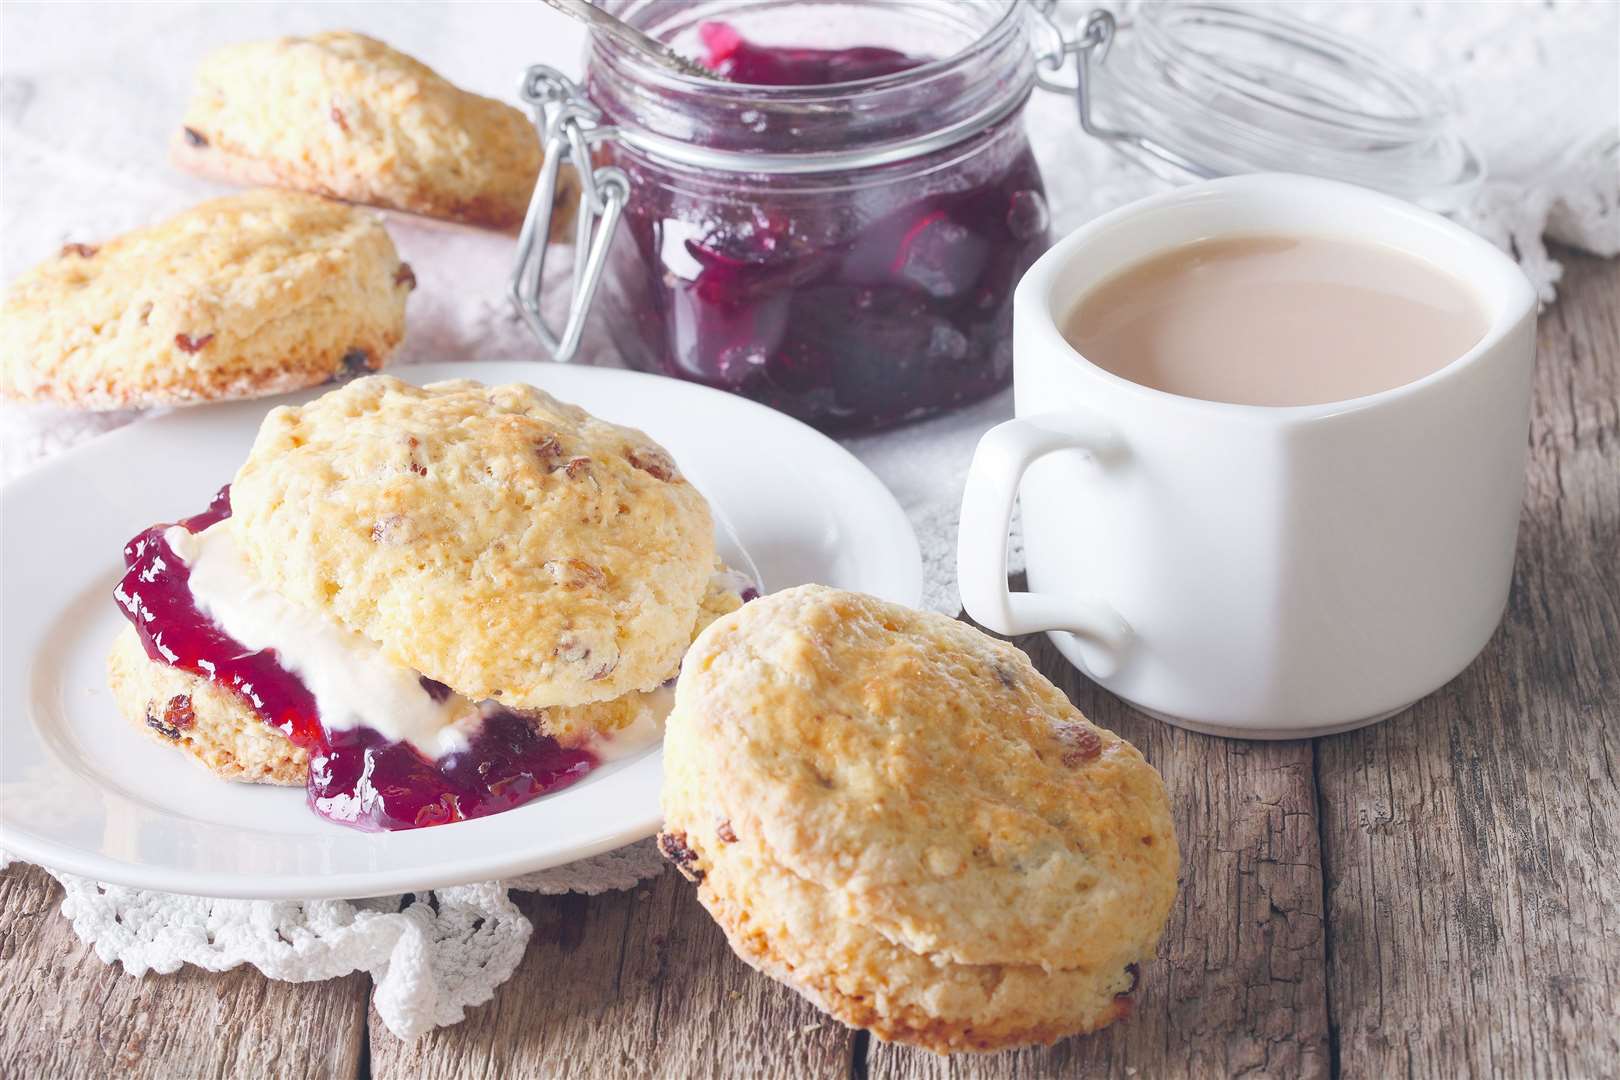 There is nothing as restorative as a scone and jam.